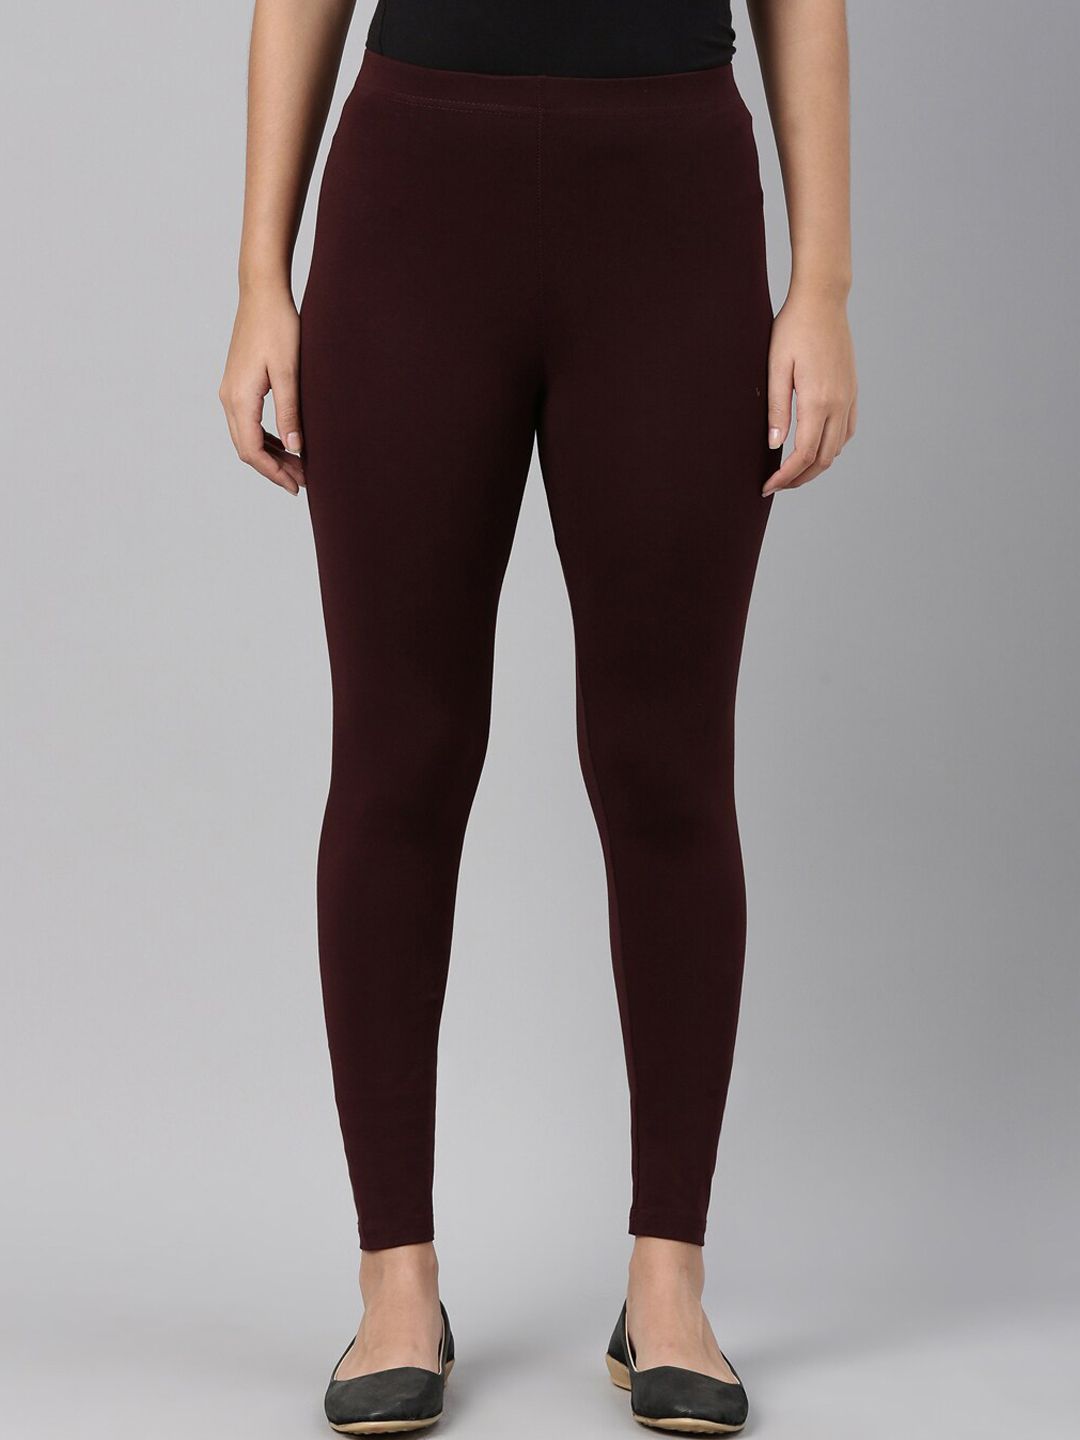 Go Colors Women Maroon Solid Ankle-Length Leggings Price in India